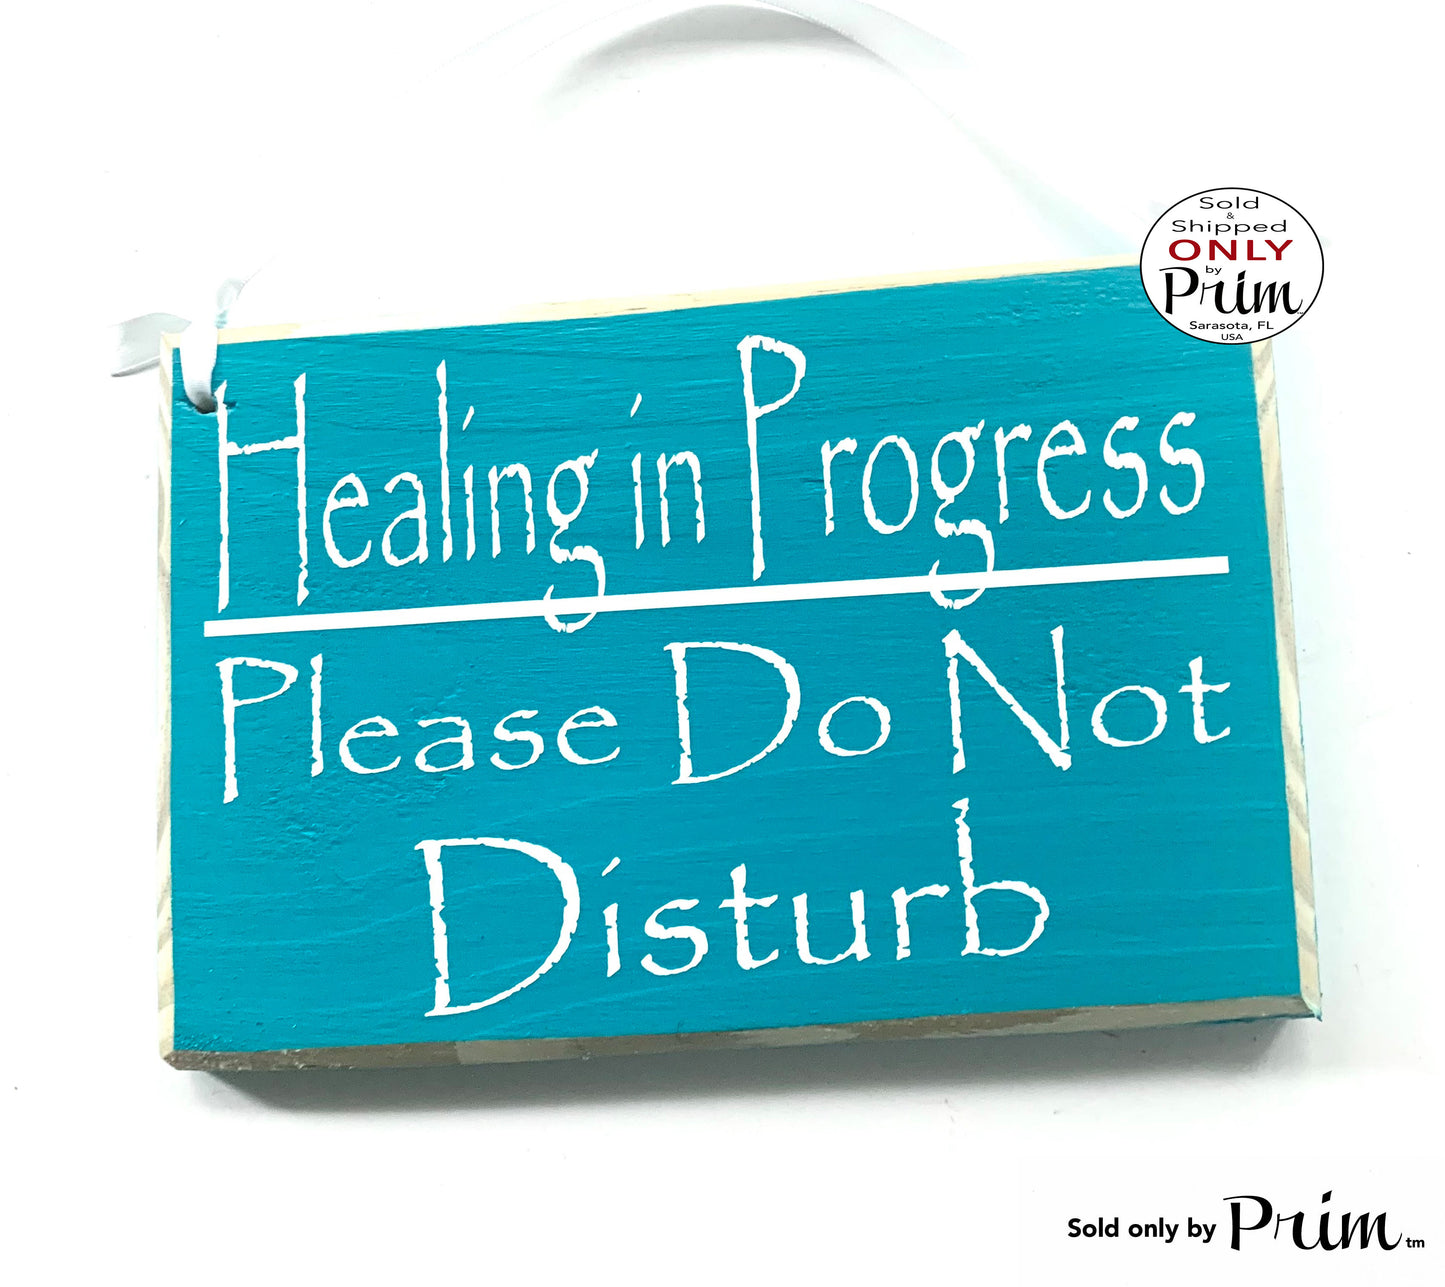 8x6 Healing In Progress Please Do Not Disturb Custom Wood Sign | Spa Salon In Session Treatment Office Door Therapy Room Wall Door Plaque Designs by Prim